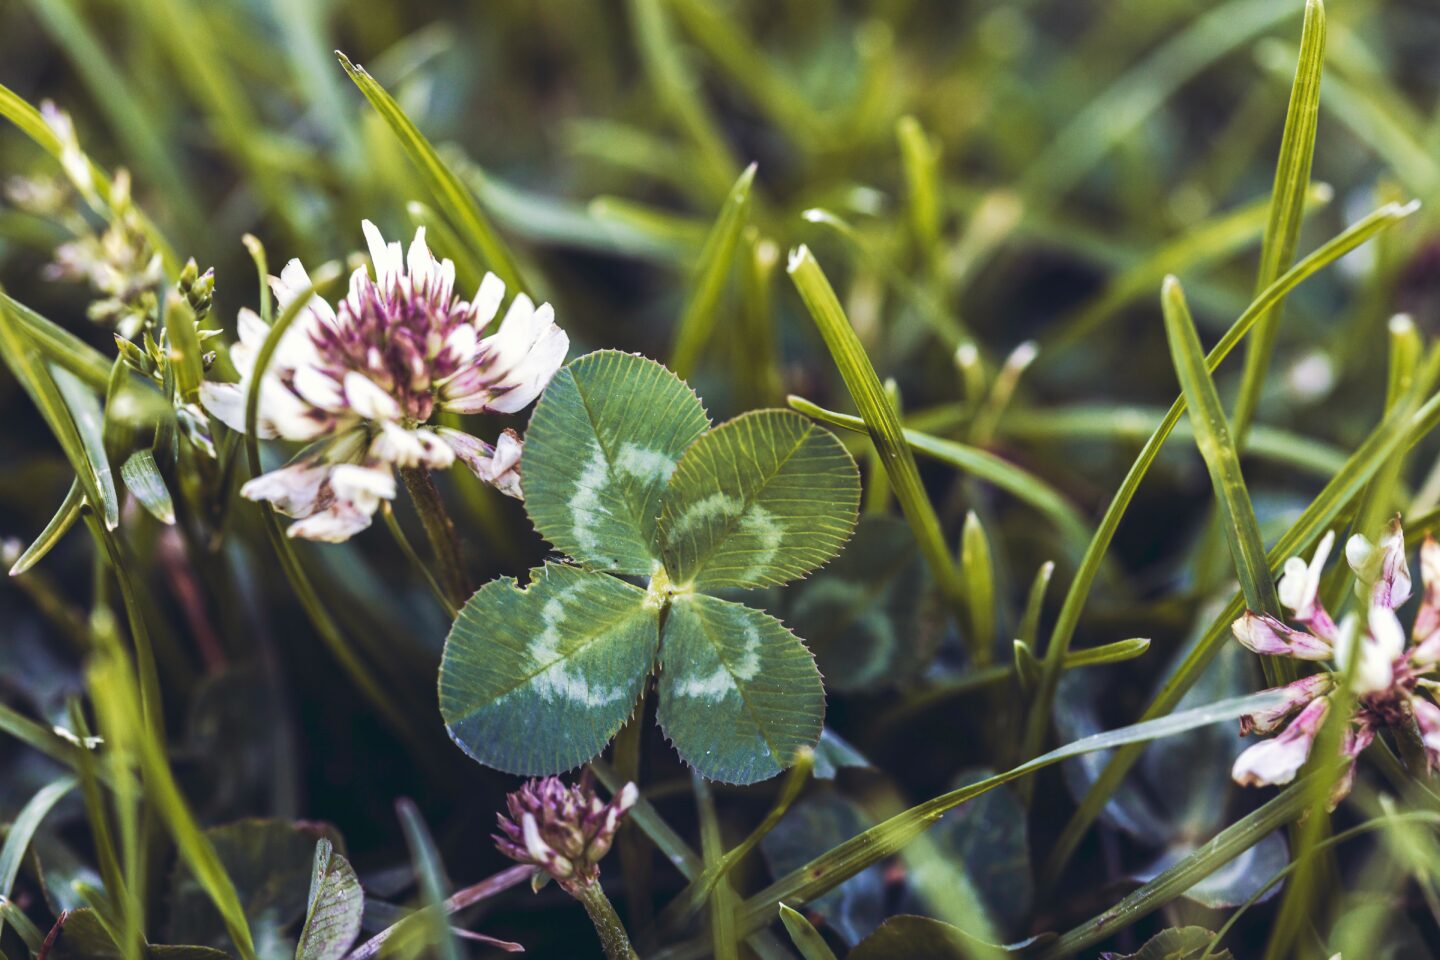 Four-Leaf Clover Meaning, Luck + Prosperity